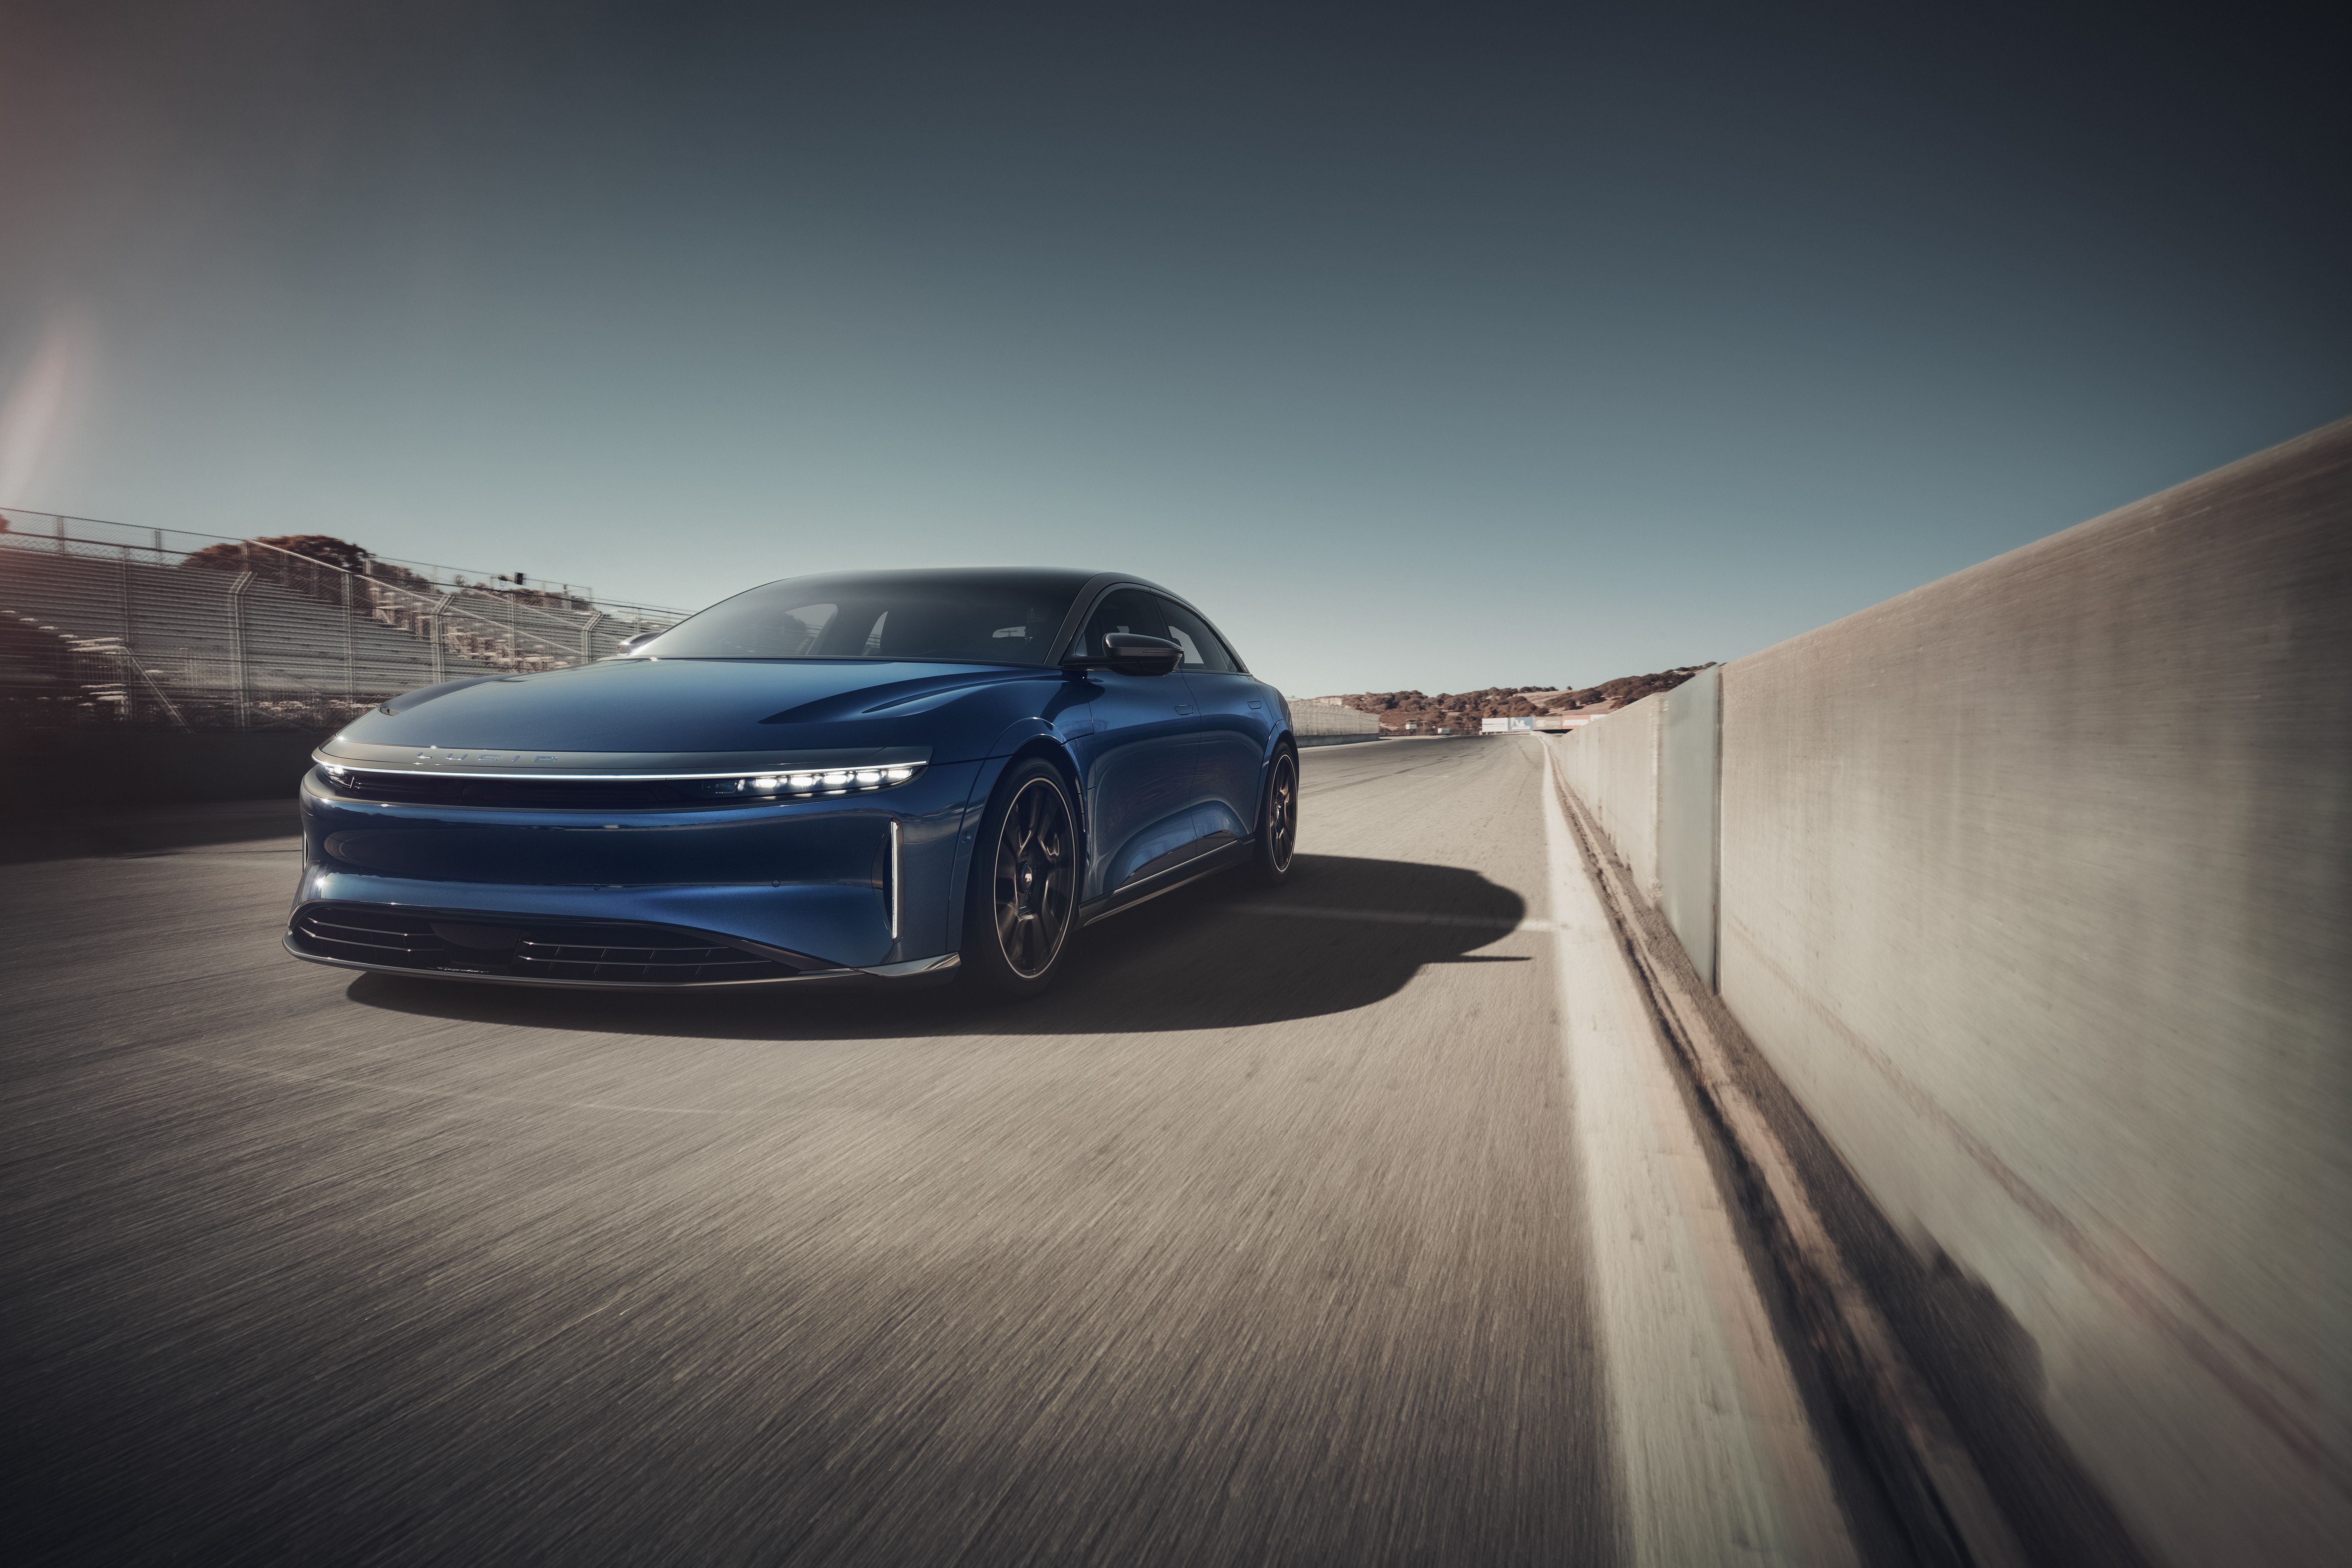 1200+-HP Lucid Air Sapphire EV Will Have Shocking Acceleration